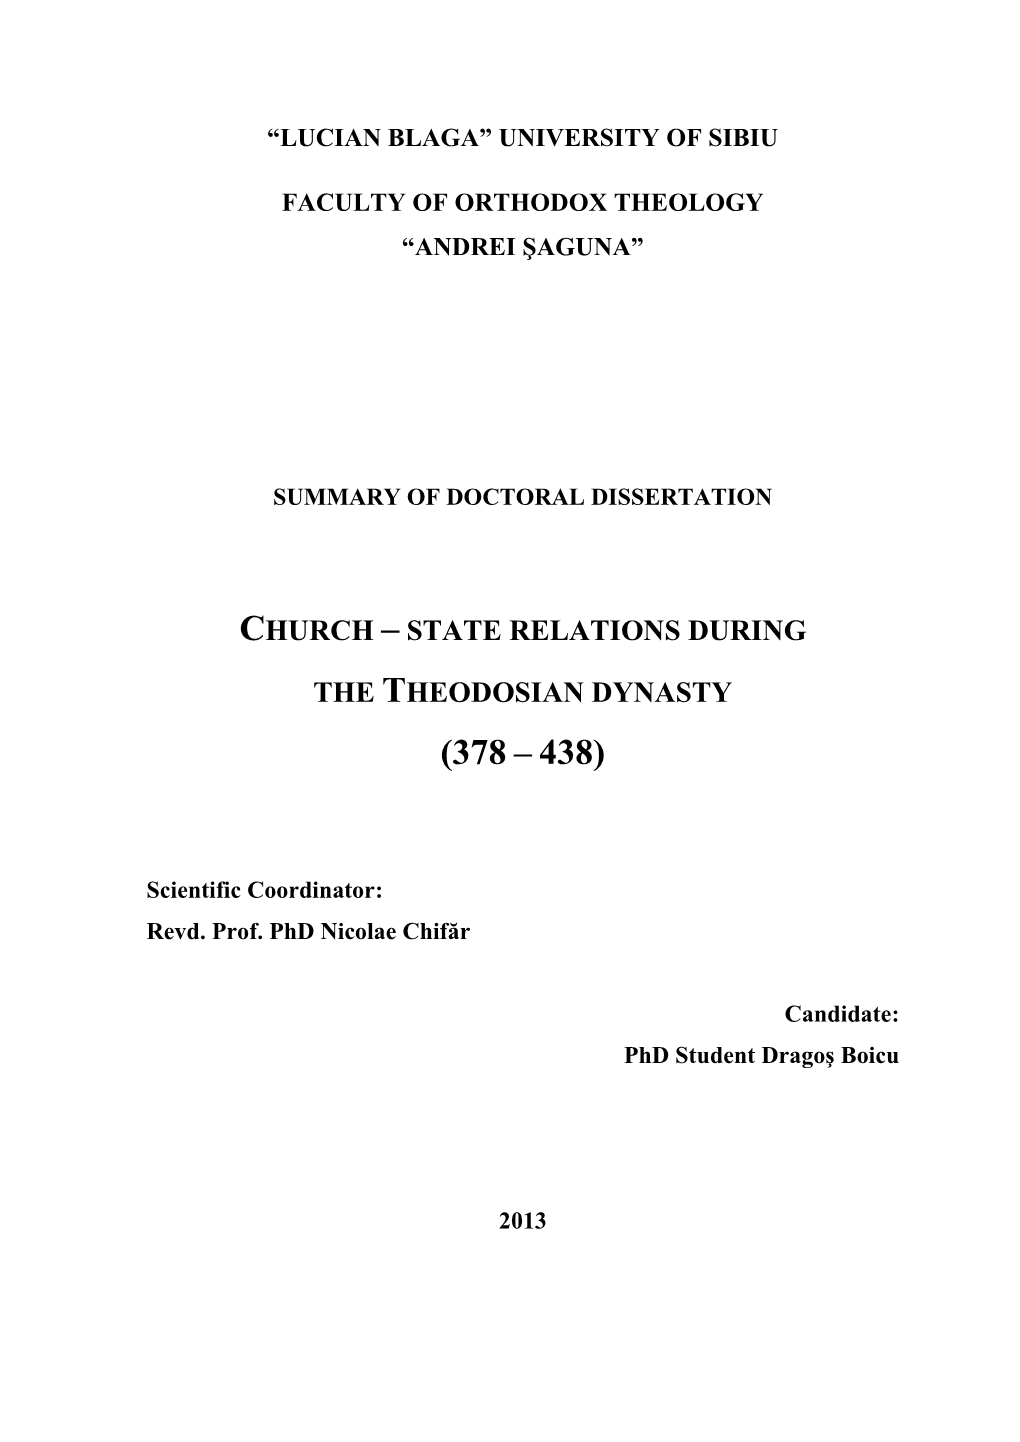 Church – State Relations During the Theodosian